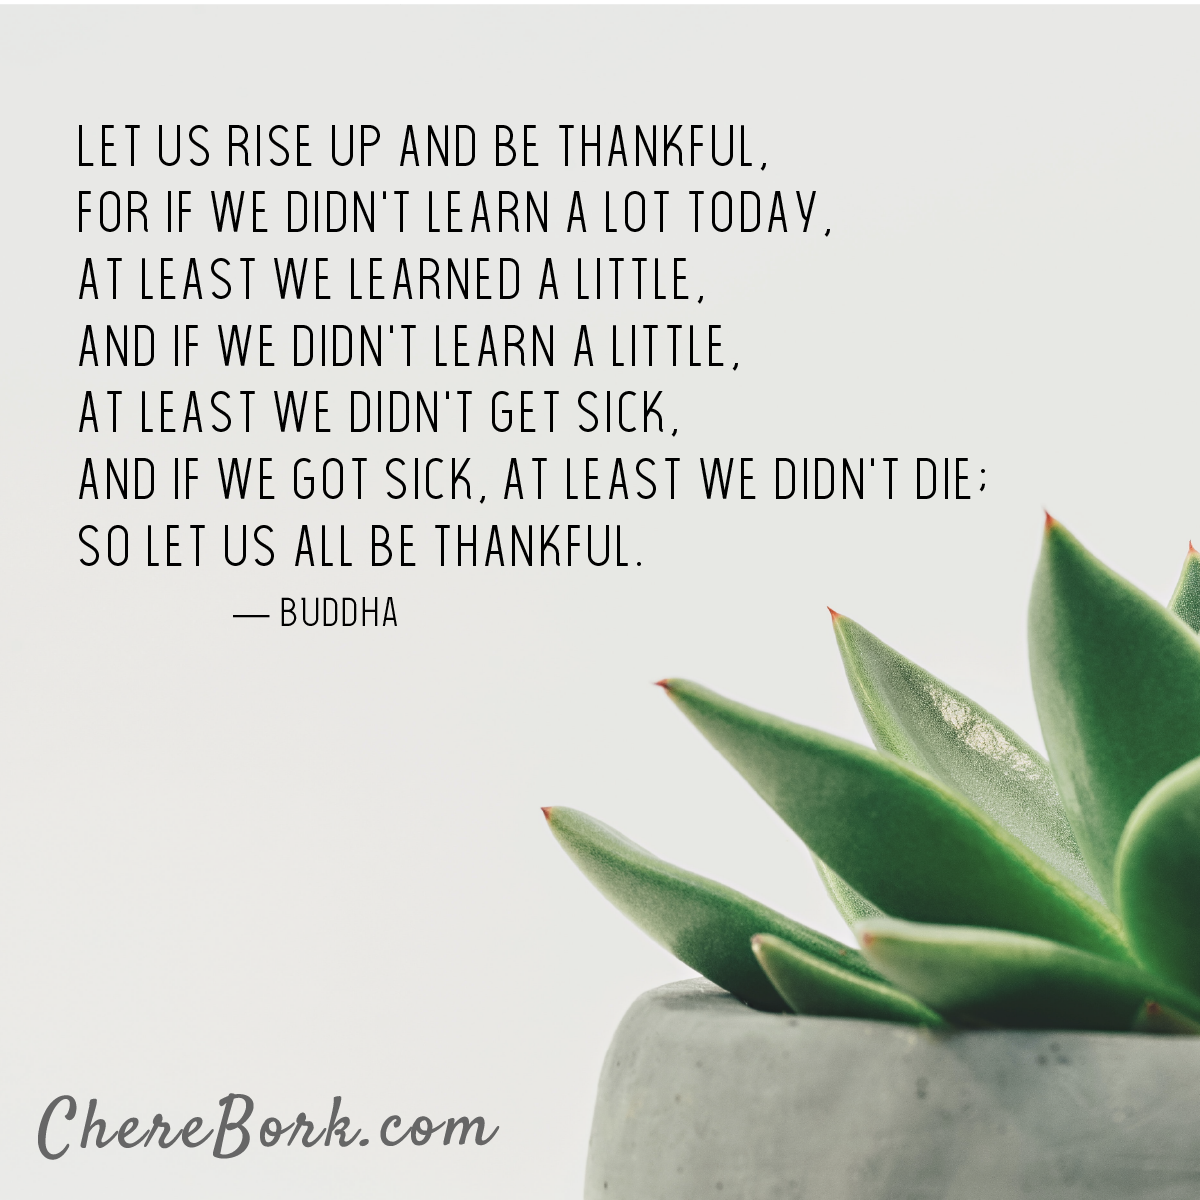 Let us rise up and be thankful, for if we didn't learn a lot today, at least we learned a little, and if we didn't learn a little, at least we didn't get sick, and if we got sick, at least we didn't die; so let us all be thankful. -Buddha